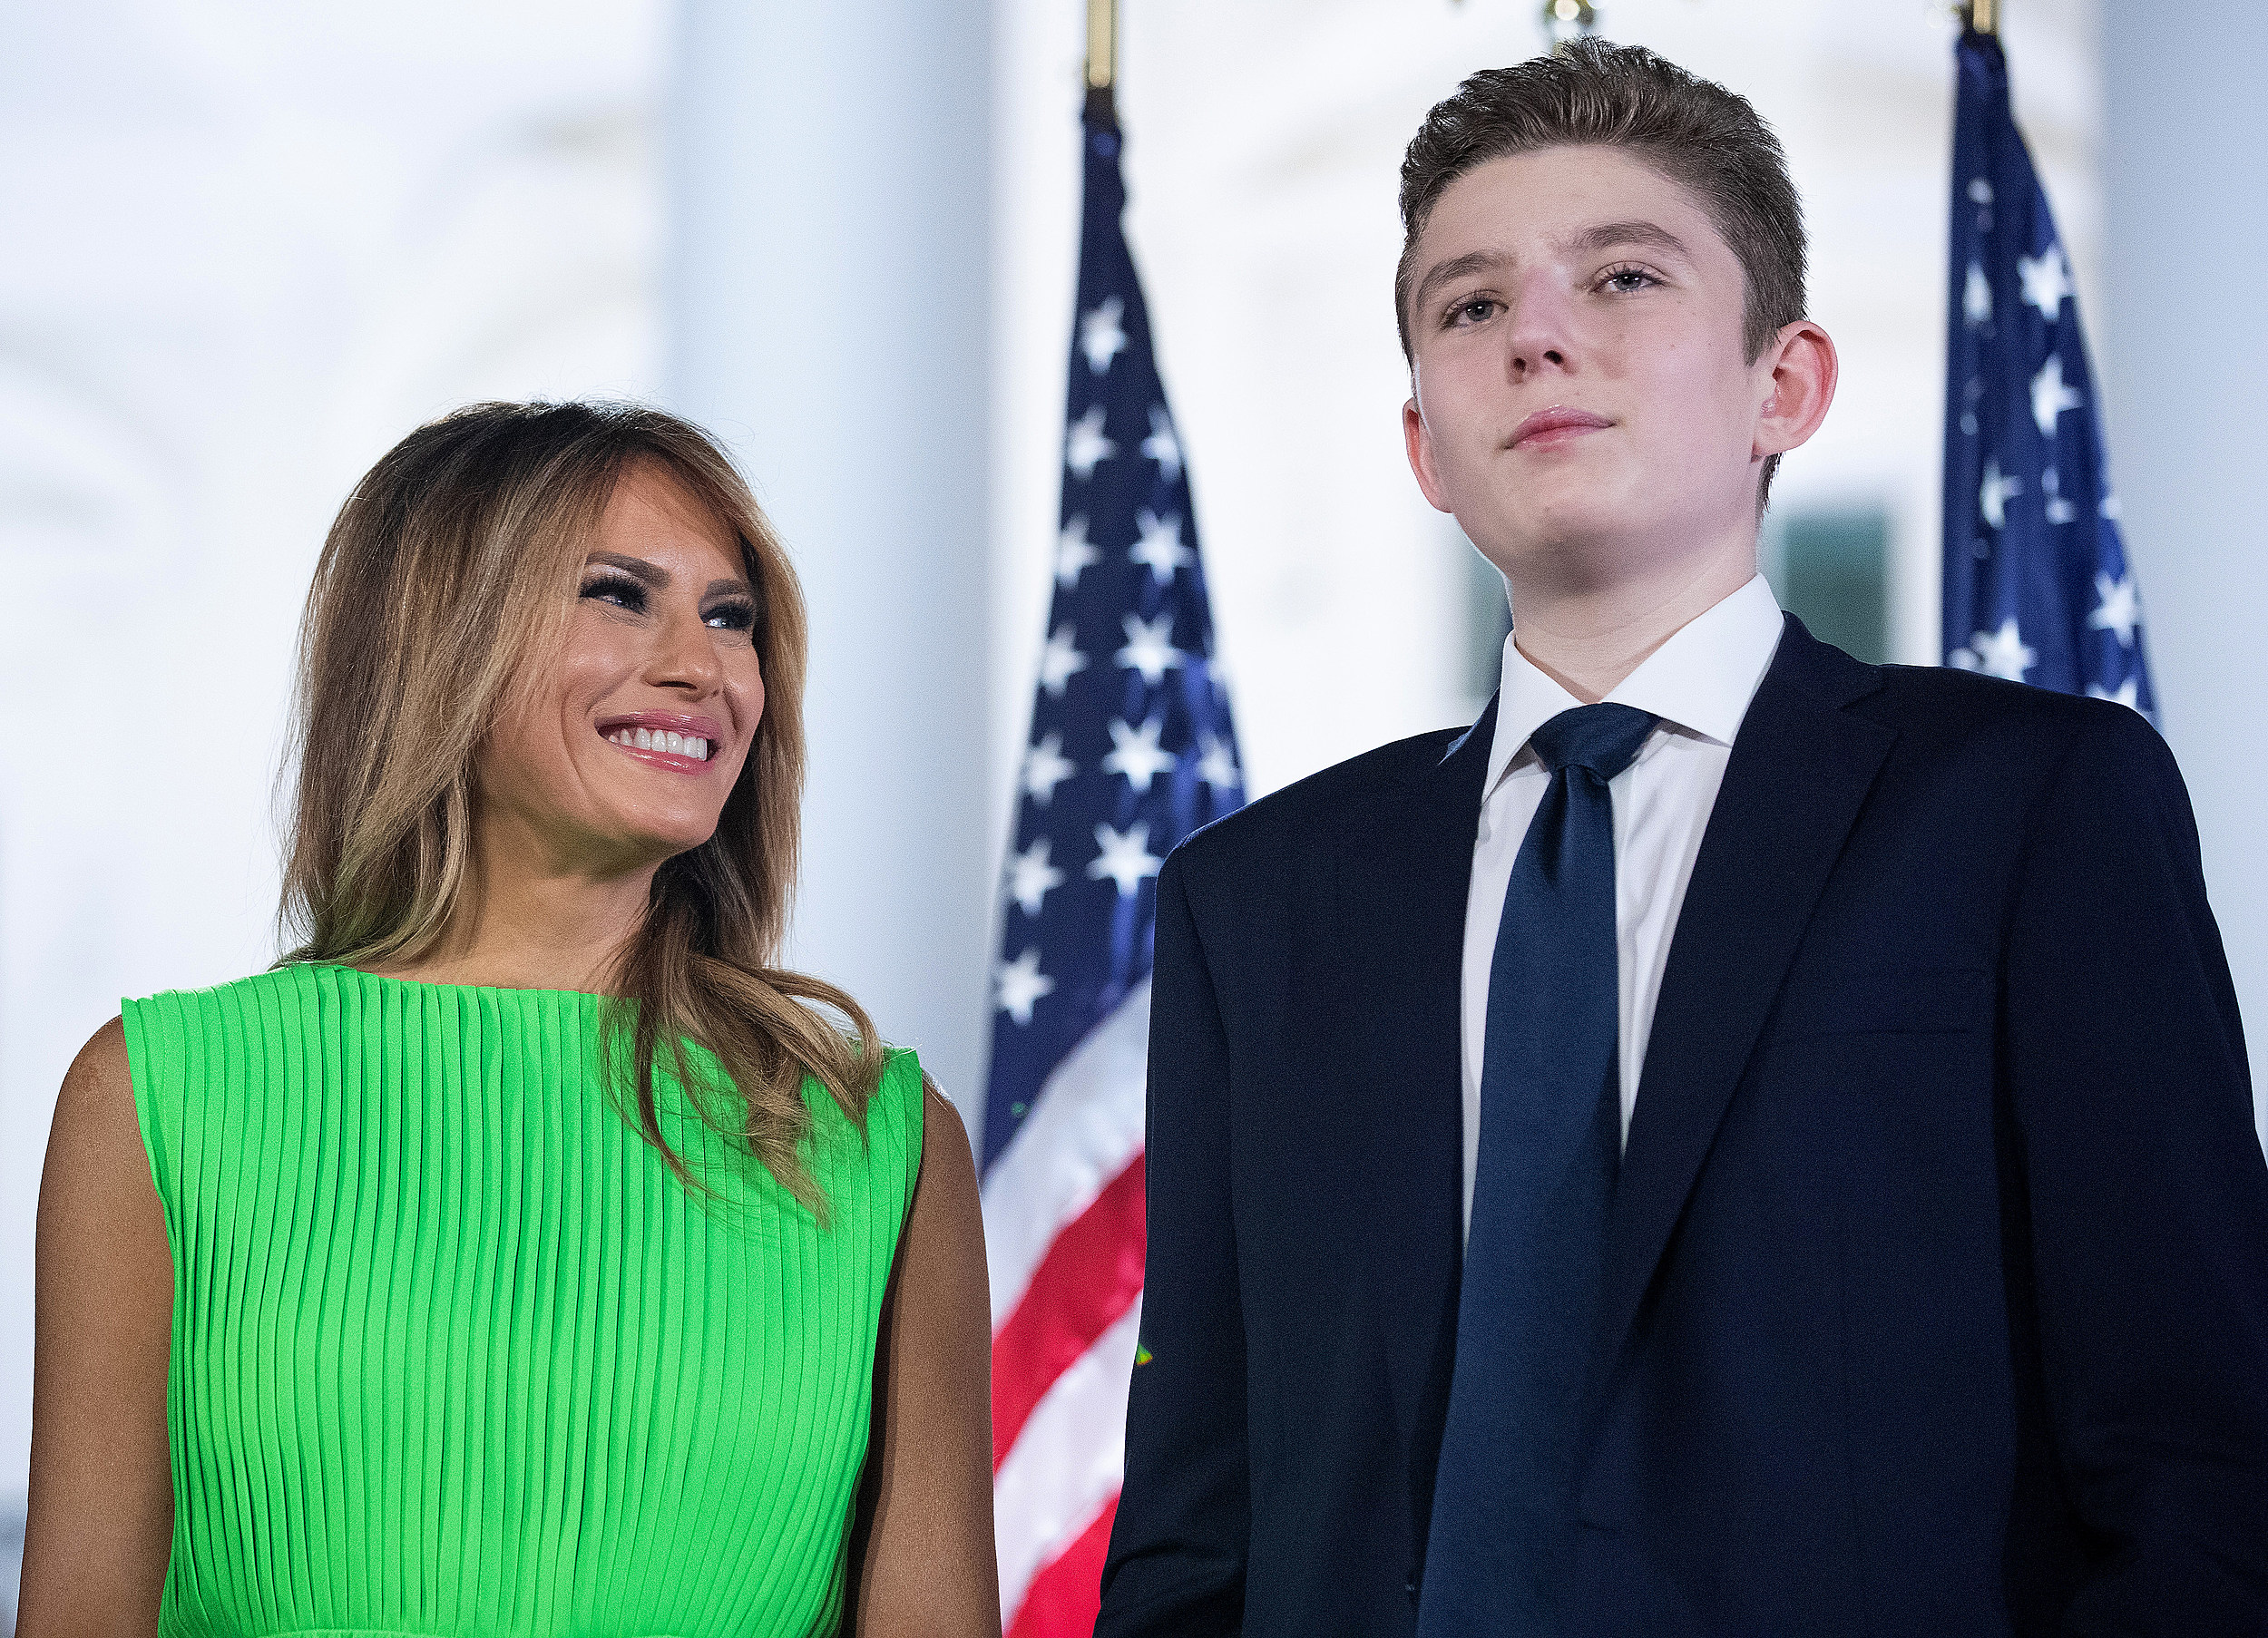 Barron Trump Spotted at 6-Feet-7-Inches Tall [PHOTO]